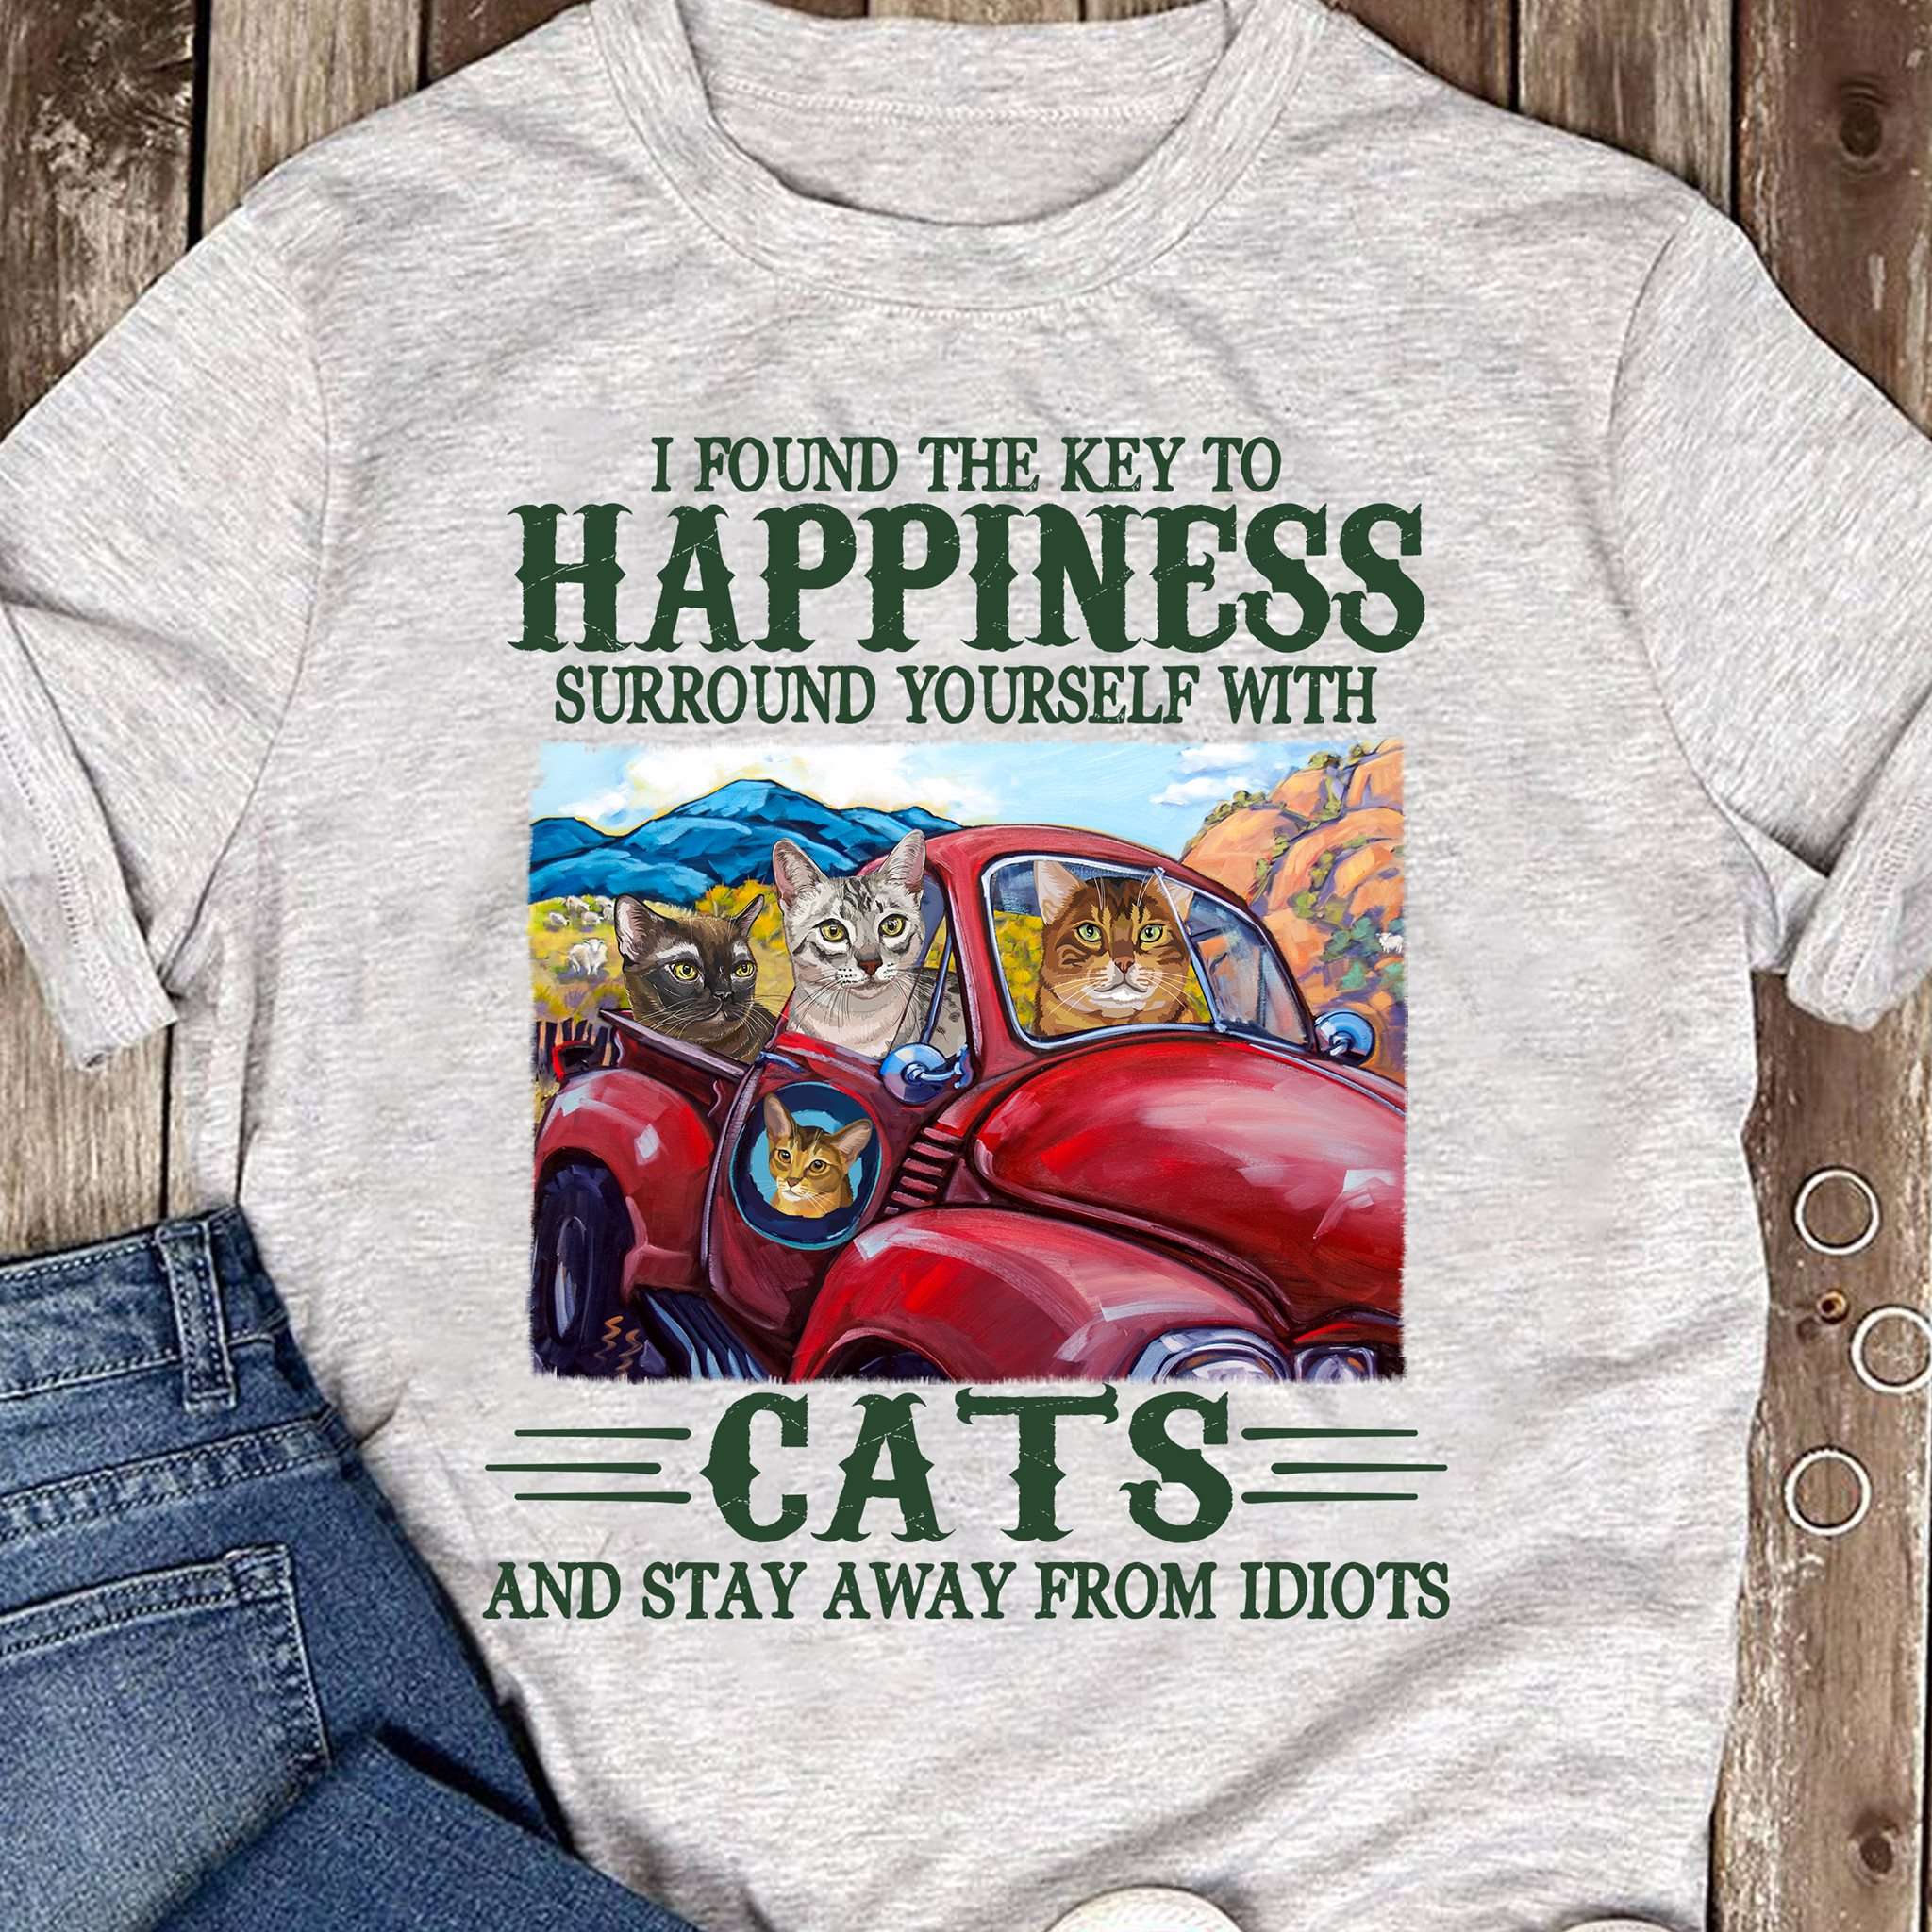 I found the key to happiness, surround yourself with cats and stay away from idiots - Cat on truck